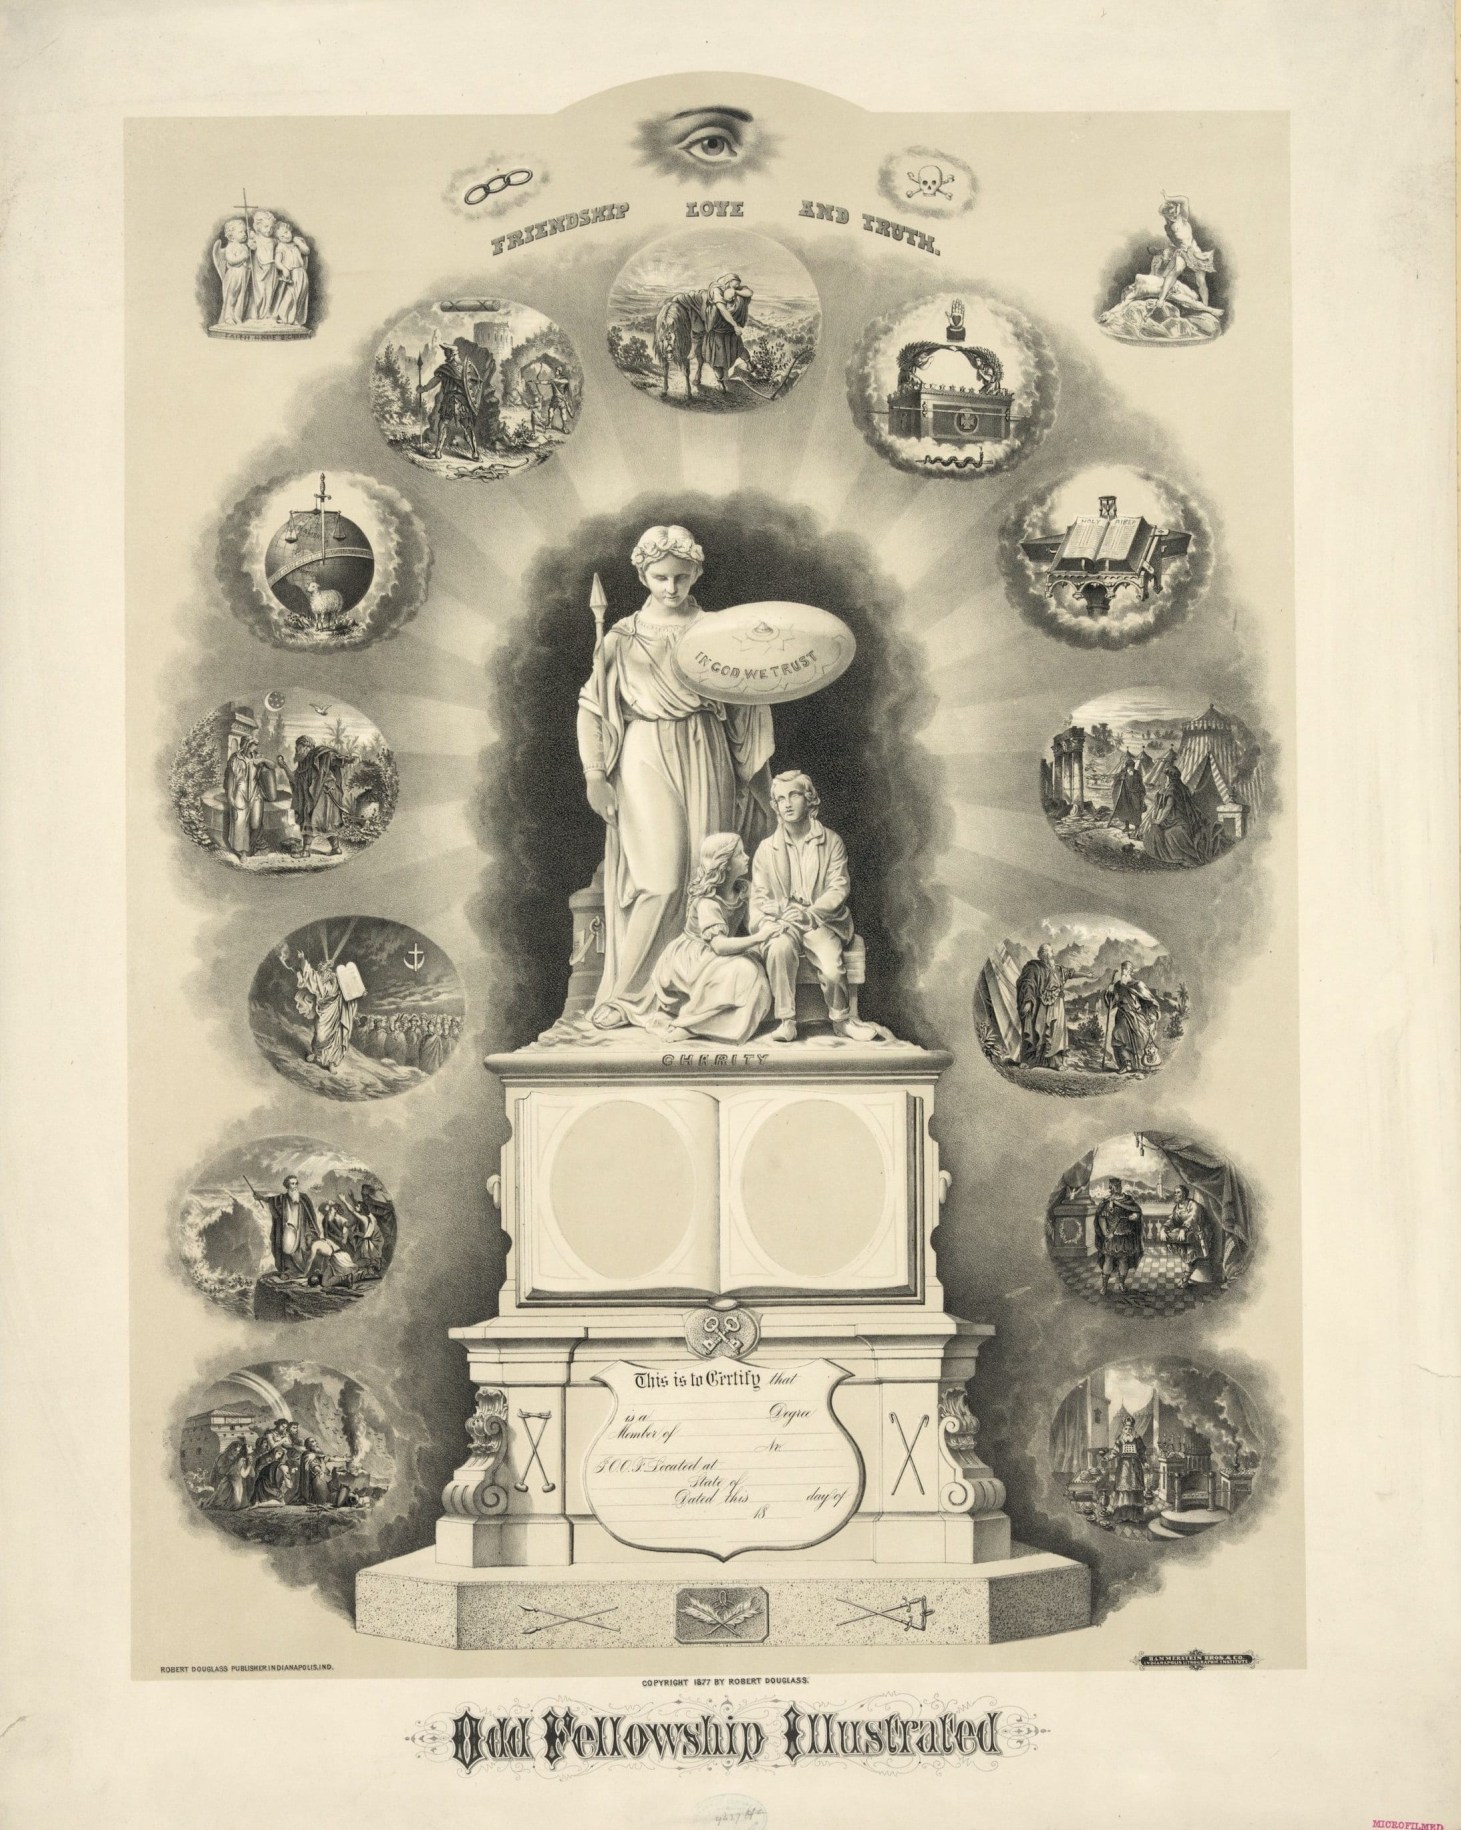 Lithograph titled &quot;Odd Fellowship Illustrated&quot; featuring a statue labeled &quot;Charity&quot; on which is a certificate in the shape of a shield to indicate membership in the Odd Fellowship. Around the statue, under the title &quot;Friendship Love and Truth,&quot; are vignettes depicting biblical scenes.